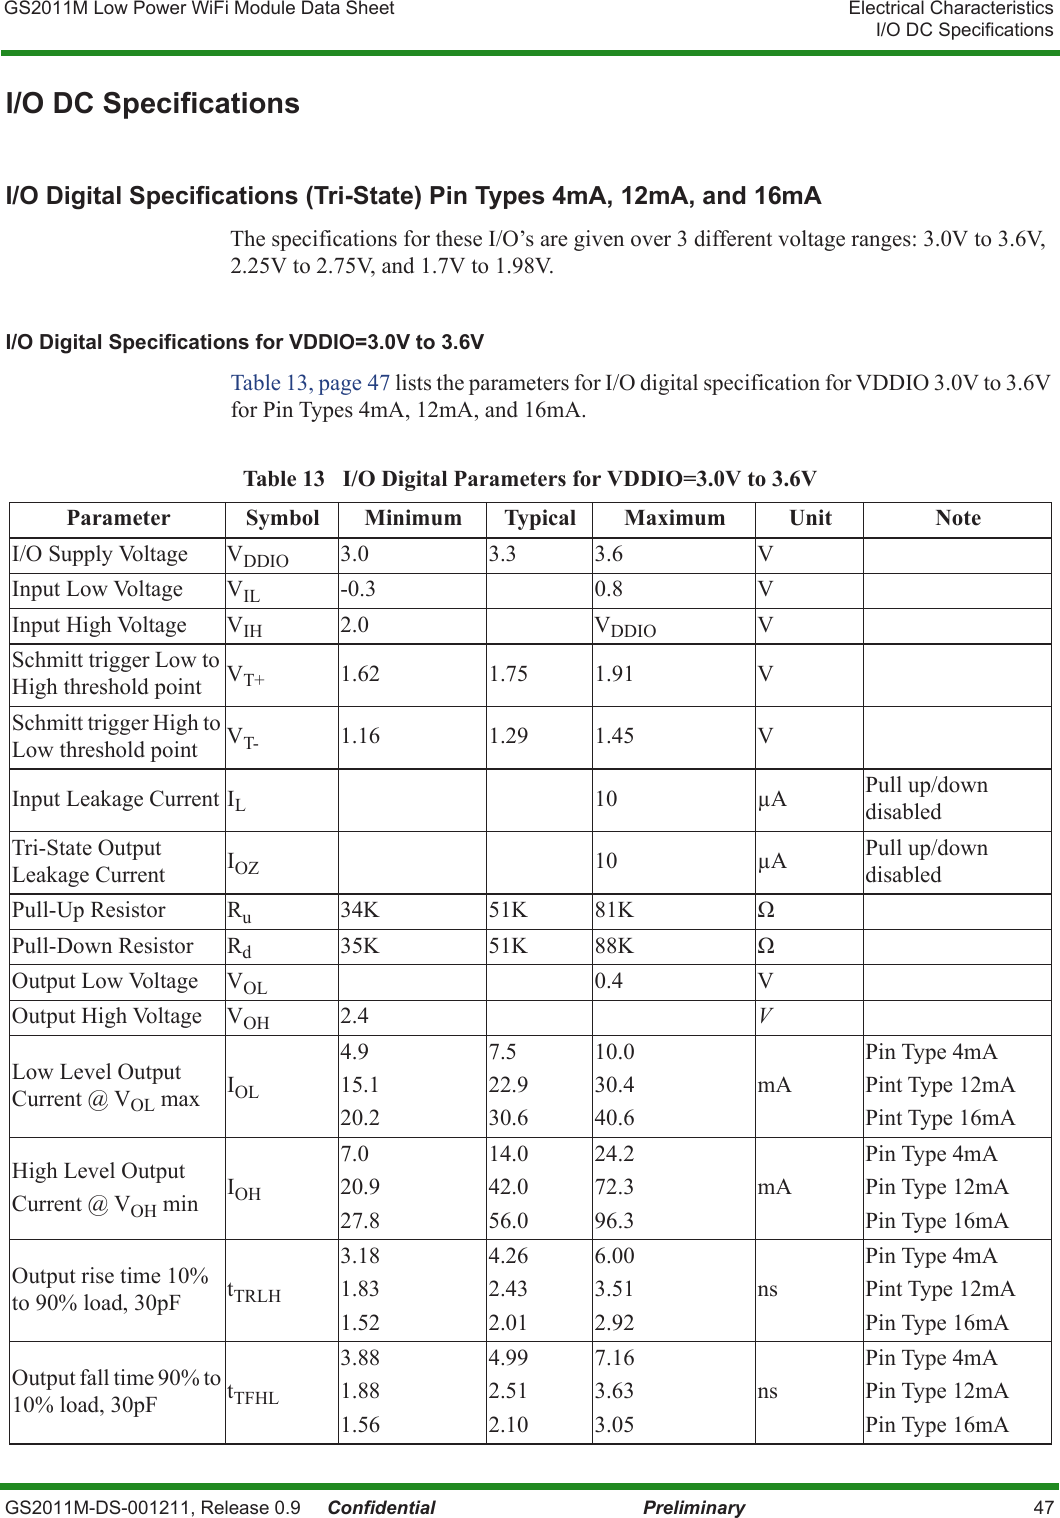 GS2011M Low Power WiFi Module Data Sheet Electrical CharacteristicsI/O DC SpecificationsGS2011M-DS-001211, Release 0.9     Confidential Preliminary 47I/O DC SpecificationsI/O Digital Specifications (Tri-State) Pin Types 4mA, 12mA, and 16mAThe specifications for these I/O’s are given over 3 different voltage ranges: 3.0V to 3.6V, 2.25V to 2.75V, and 1.7V to 1.98V.I/O Digital Specifications for VDDIO=3.0V to 3.6VTable 13, page 47 lists the parameters for I/O digital specification for VDDIO 3.0V to 3.6V for Pin Types 4mA, 12mA, and 16mA.Table 13   I/O Digital Parameters for VDDIO=3.0V to 3.6VParameter Symbol Minimum Typical Maximum Unit NoteI/O Supply Voltage VDDIO 3.0 3.3 3.6 VInput Low Voltage VIL -0.3 0.8 VInput High Voltage VIH 2.0 VDDIO VSchmitt trigger Low to High threshold point VT+ 1.62 1.75 1.91 VSchmitt trigger High to Low threshold point VT- 1.16 1.29 1.45 VInput Leakage Current IL10 μAPull up/down disabledTri-State Output Leakage Current IOZ 10 μAPull up/down disabled Pull-Up Resistor Ru34K 51K 81K ΩPull-Down Resistor Rd35K 51K 88K ΩOutput Low Voltage VOL 0.4 VOutput High Voltage VOH 2.4 VLow Level Output Current @ VOL max IOL4.915.120.27.522.930.610.030.440.6mAPin Type 4mAPint Type 12mAPint Type 16mAHigh Level OutputCurrent @ VOH min IOH7.020.927.814.042.056.024.272.396.3mAPin Type 4mAPin Type 12mAPin Type 16mAOutput rise time 10% to 90% load, 30pF tTRLH3.181.831.524.262.432.016.003.512.92nsPin Type 4mAPint Type 12mAPin Type 16mAOutput fall time 90% to 10% load, 30pF tTFHL3.881.881.564.992.512.107.163.633.05nsPin Type 4mAPin Type 12mAPin Type 16mA